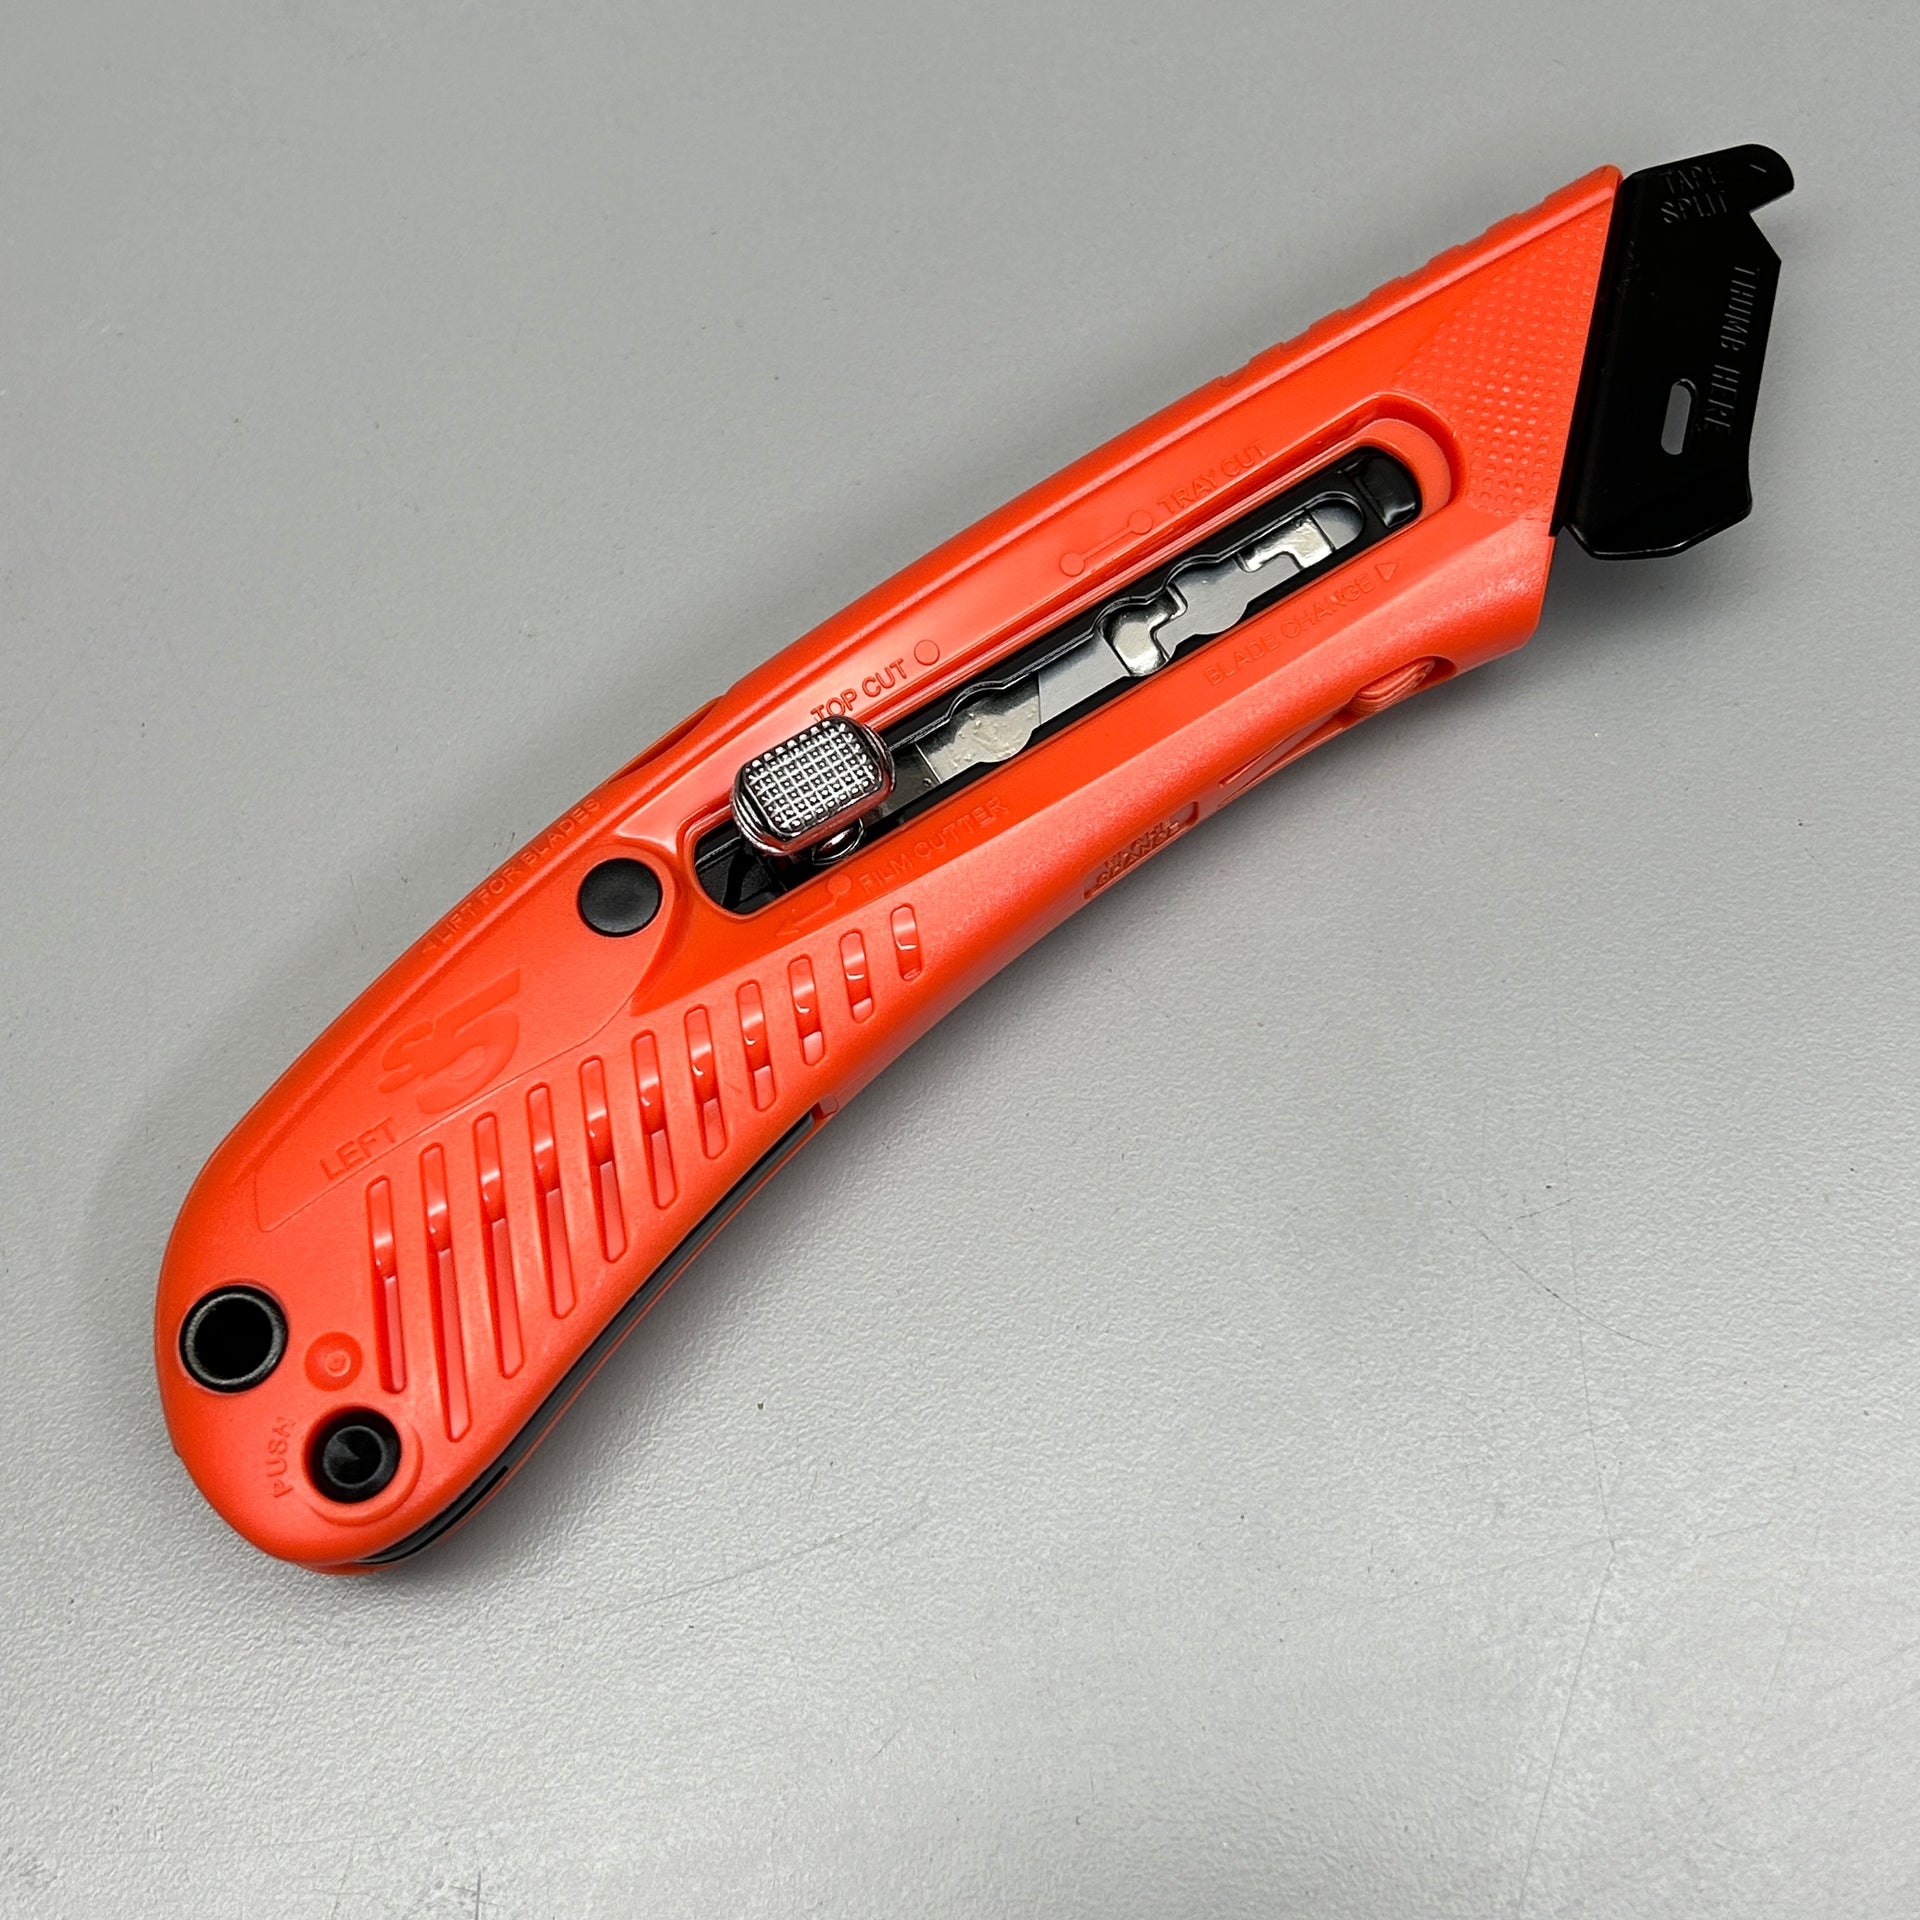 S4 Safety Cutter Utility Knife - Left Handed - case of 12-w.